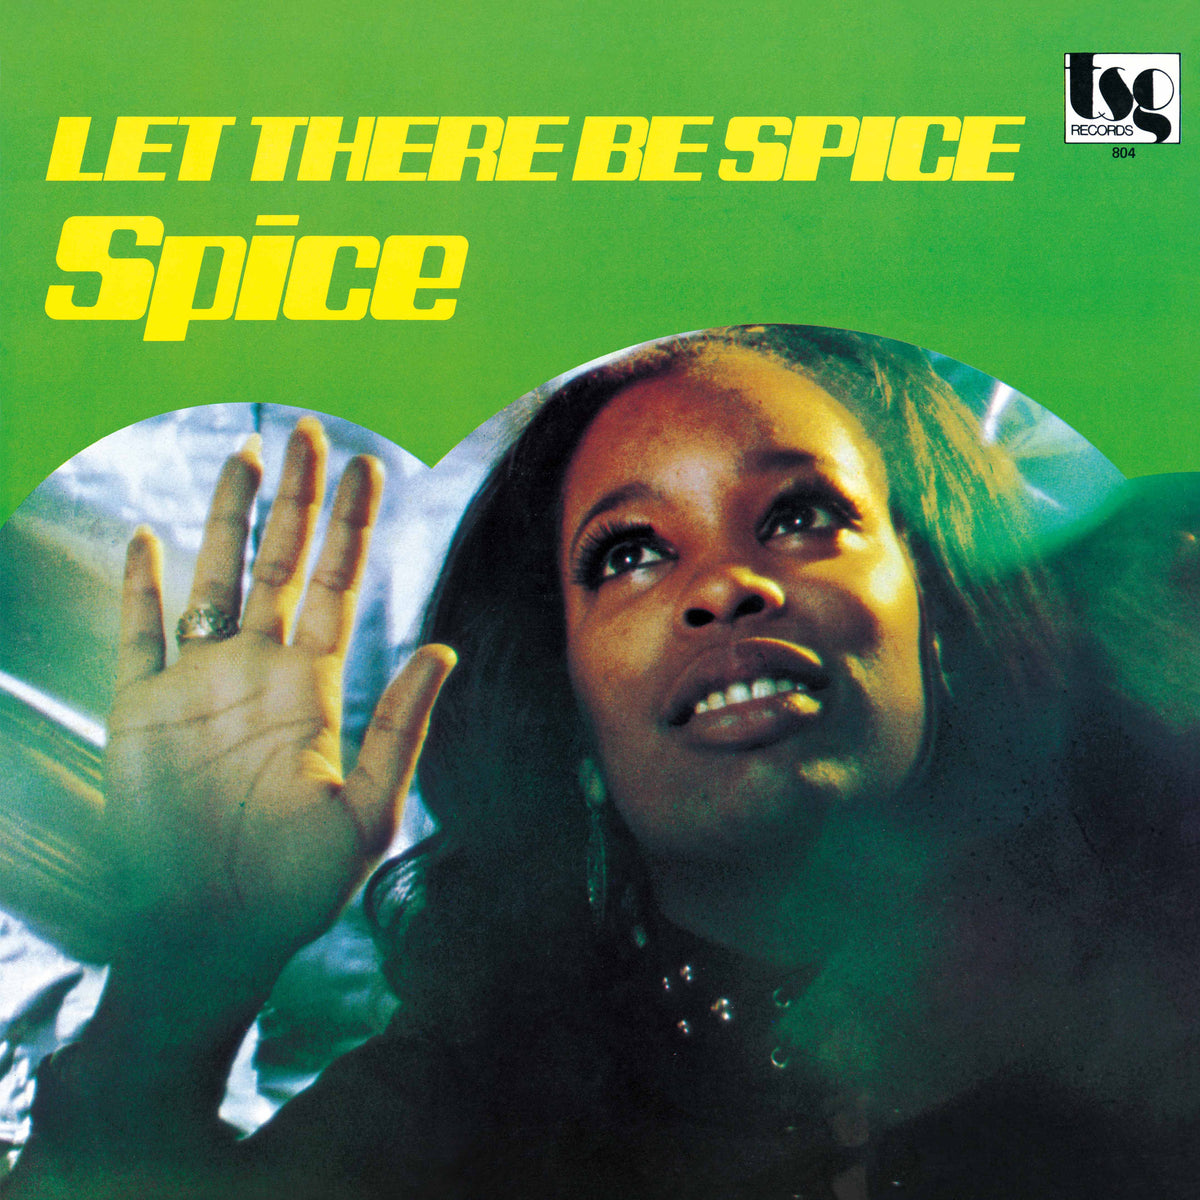 LET THERE BE SPICE スパイス LPレコード - 洋楽